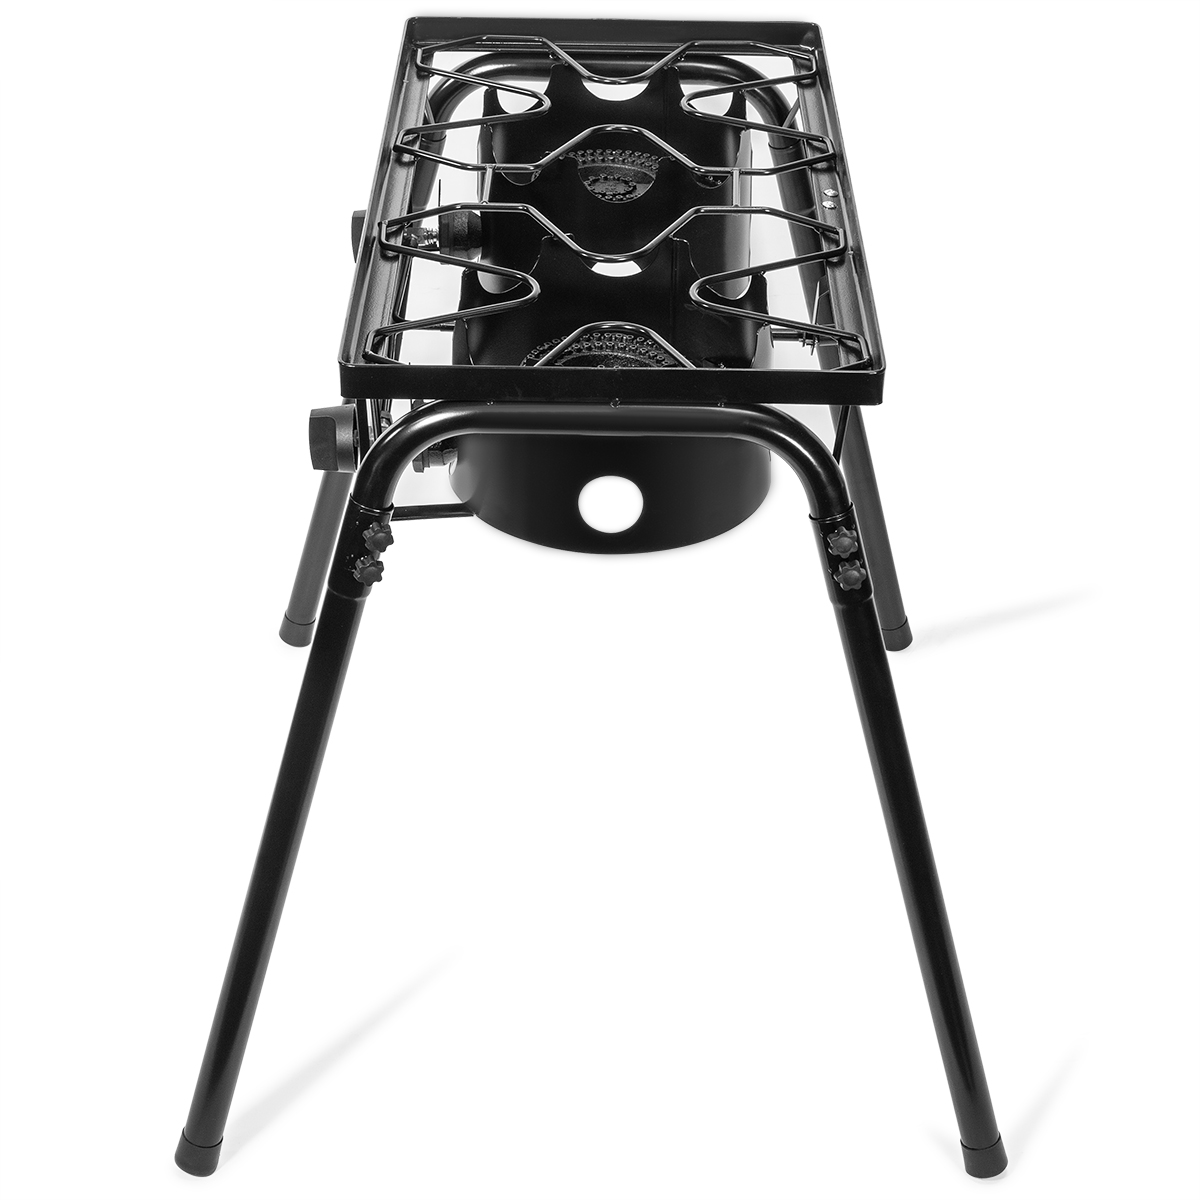 Barton Outdoor 70000 BTU 2-Burner Stove 95512-1 High-Pressure Grill Cooker BBQ Camp Gas Stove Stand - image 3 of 7